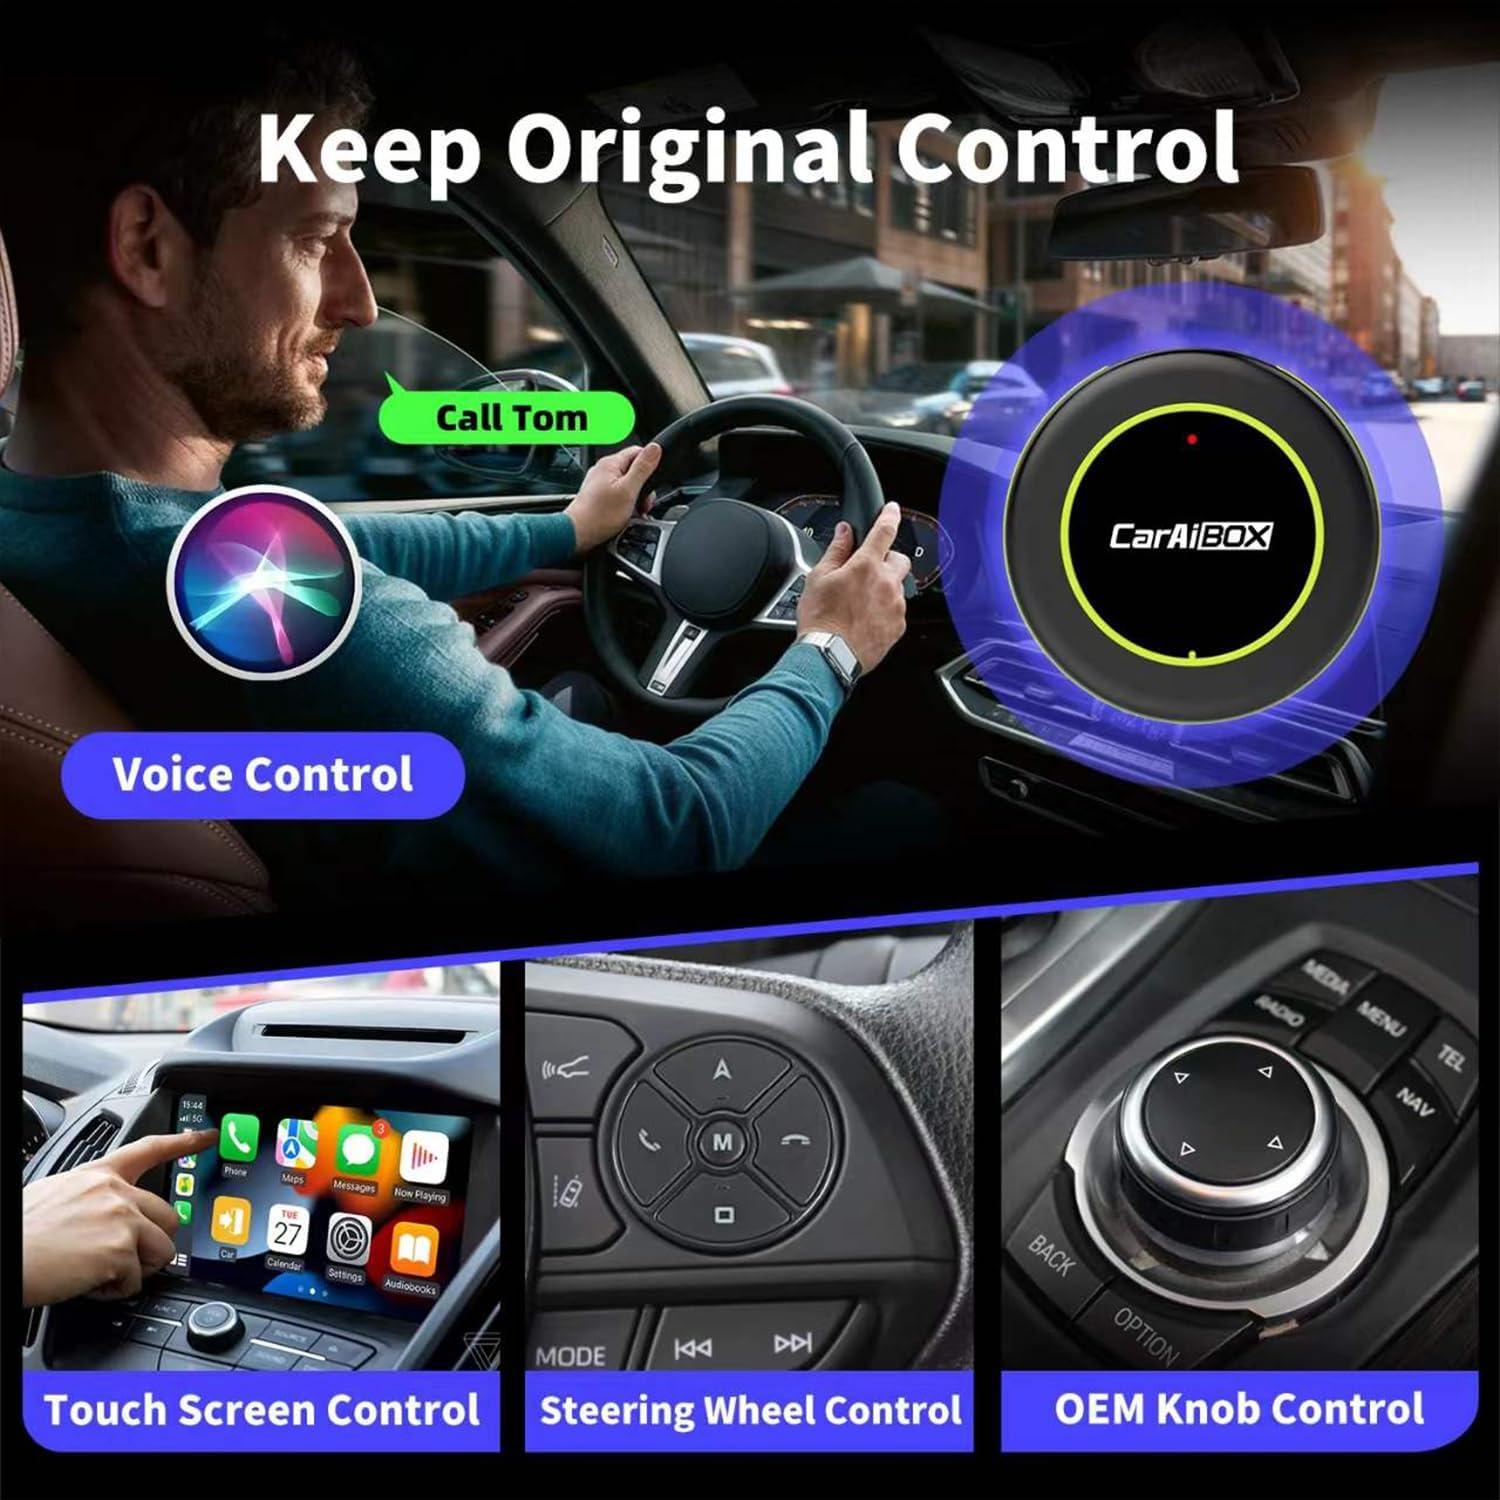 Uograde your car with the best CarPlay adapter available! The brand ne, Magic  Box CarPlay